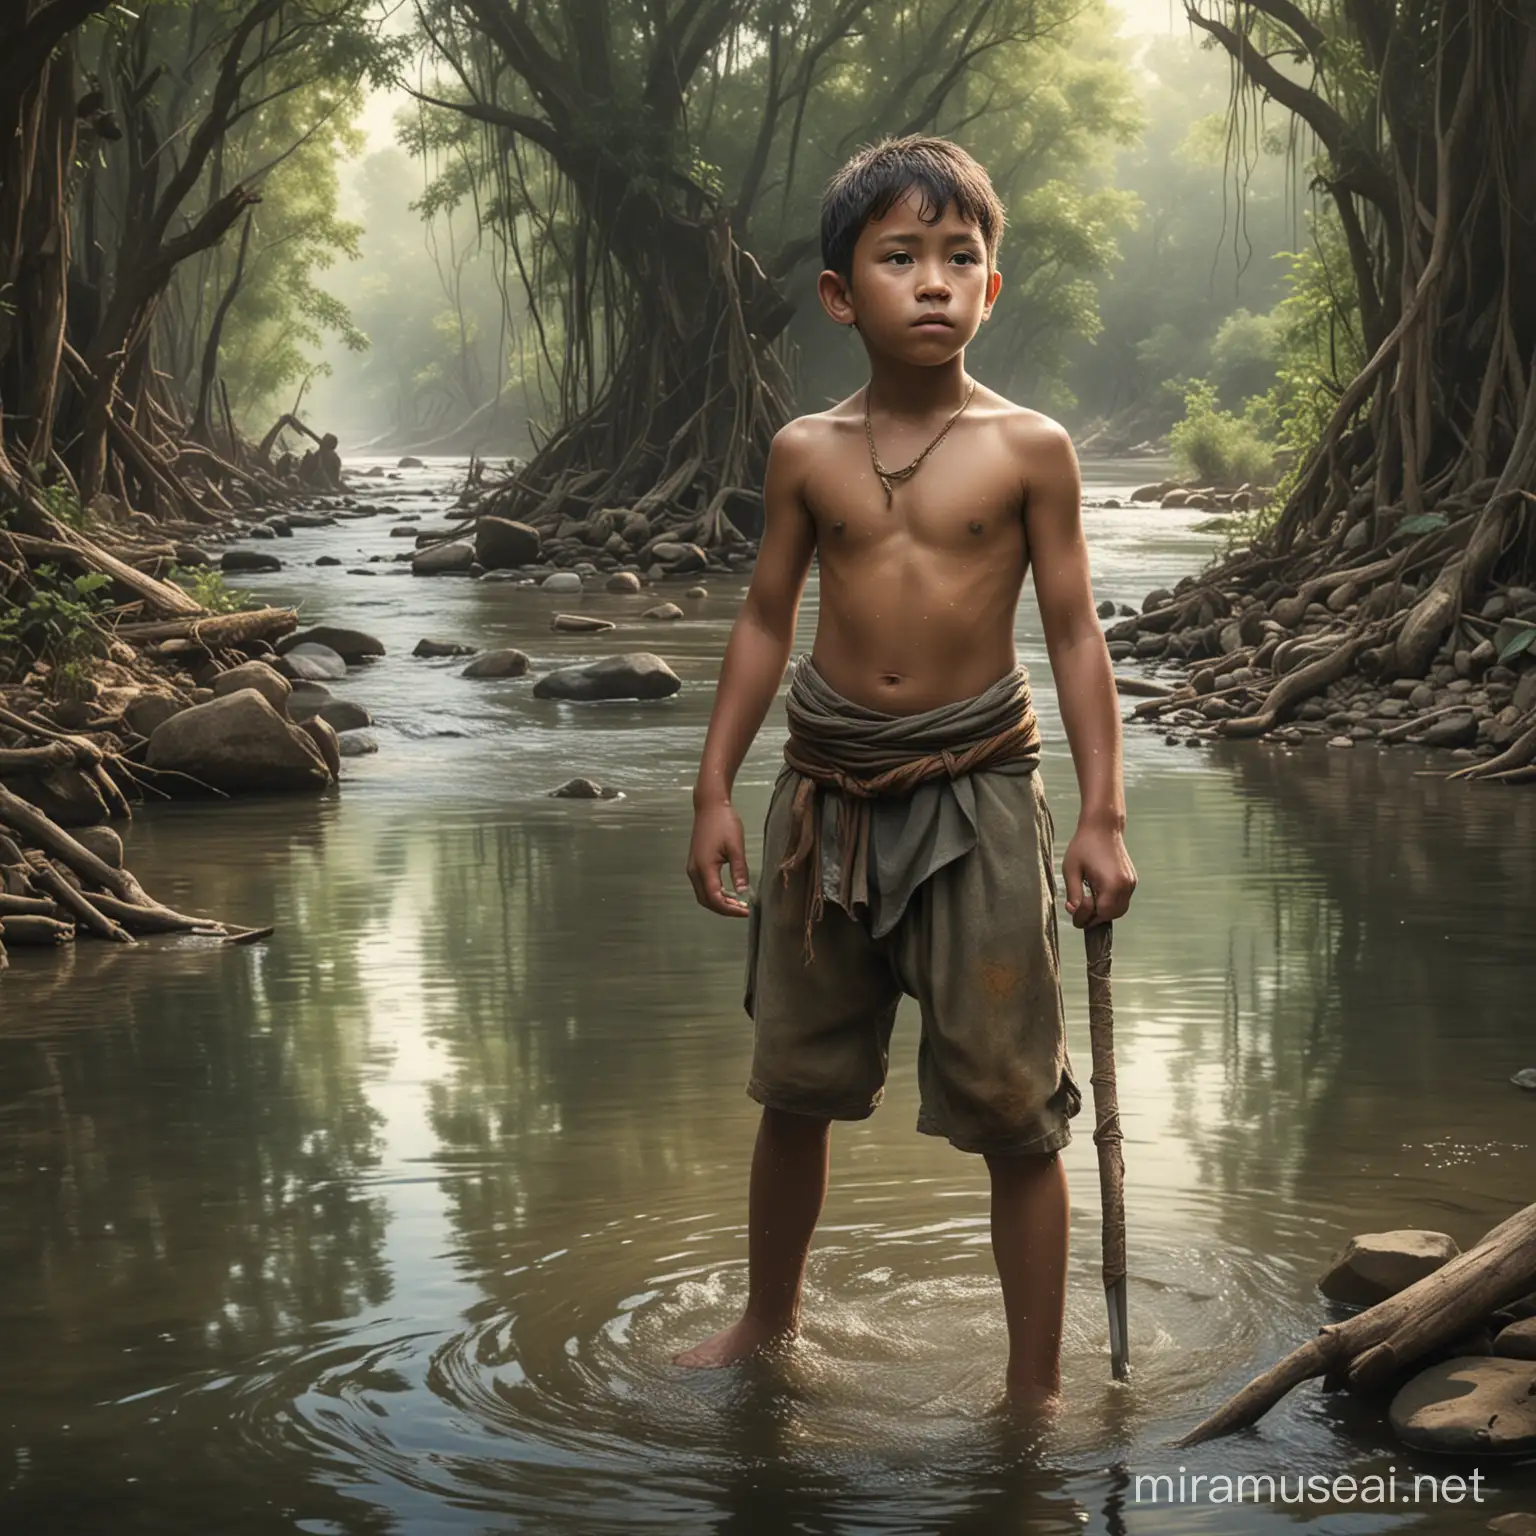 A visual narrative showing the boy's journey of self-discovery, from his infancy rescued by the river to his eventual realization of his true identity as an Evalo warrior, with each stage depicted in a series of interconnected scenes.